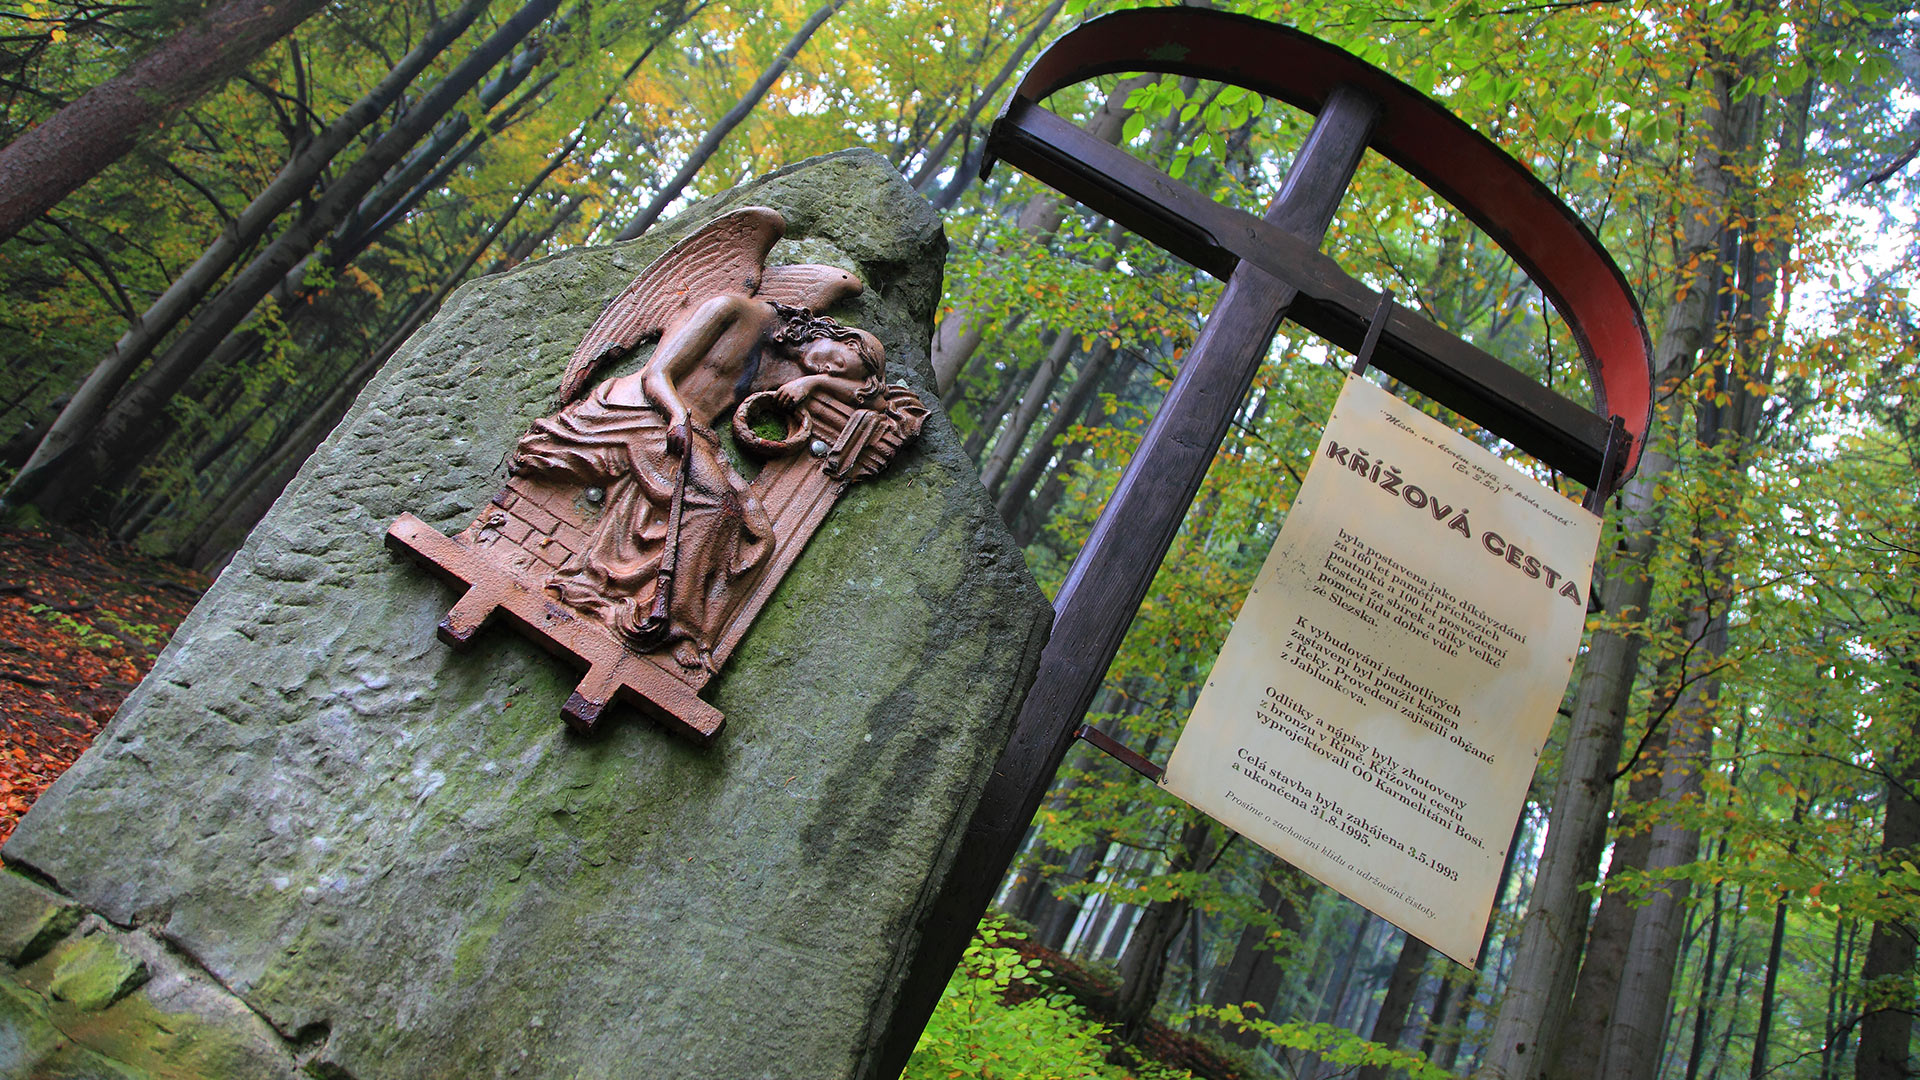 Stations of the Cross in Horní Lomna (Upper Lomna)